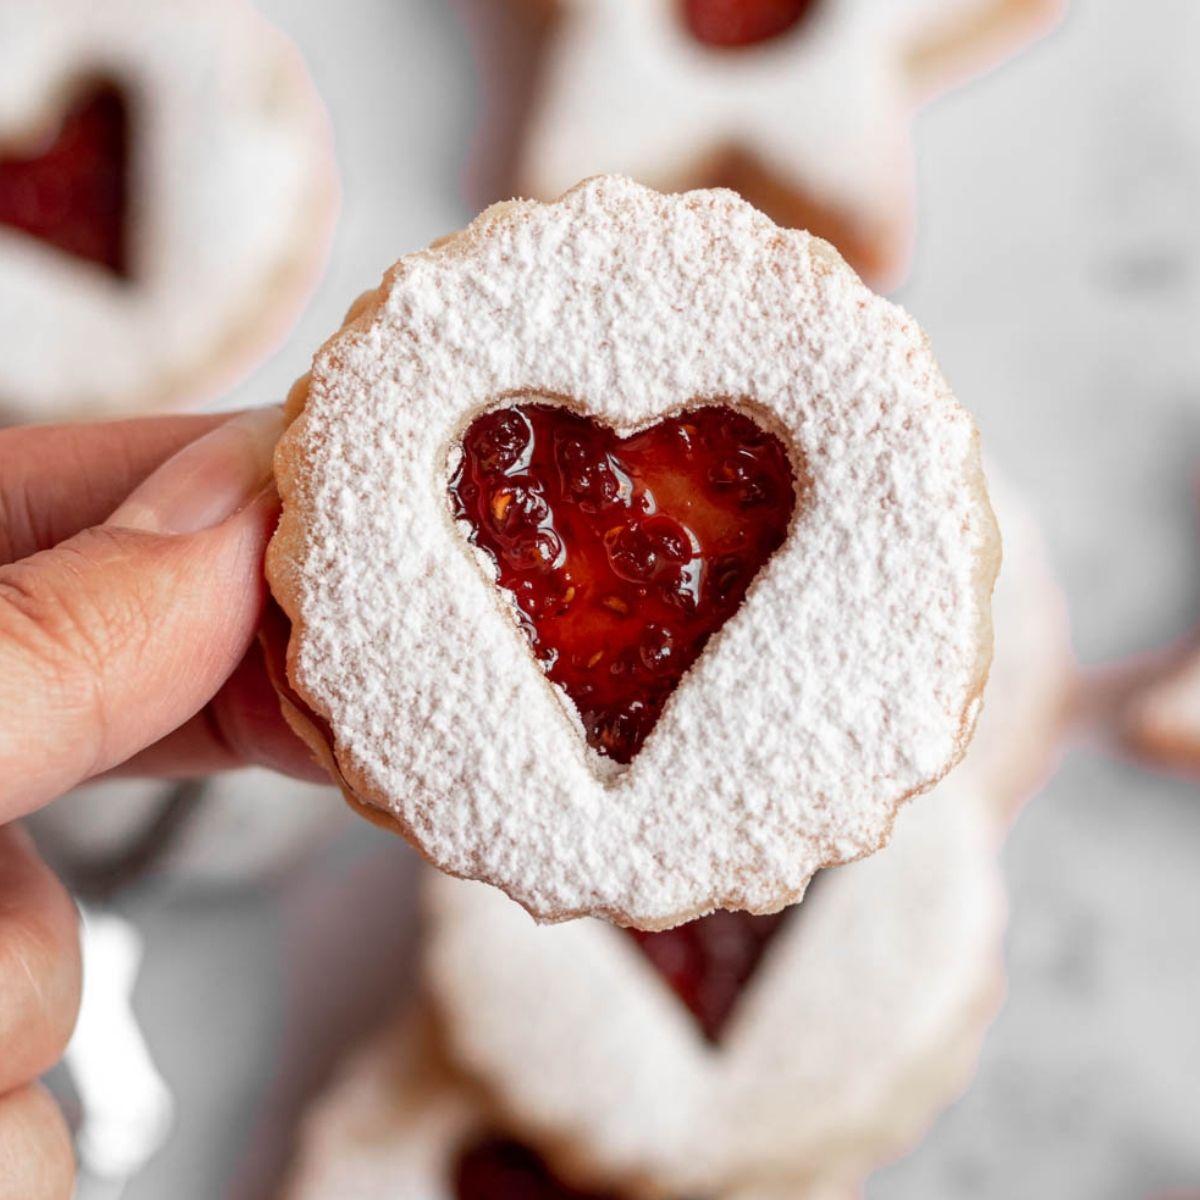 Best Linzer Cookies - Rich And Delish